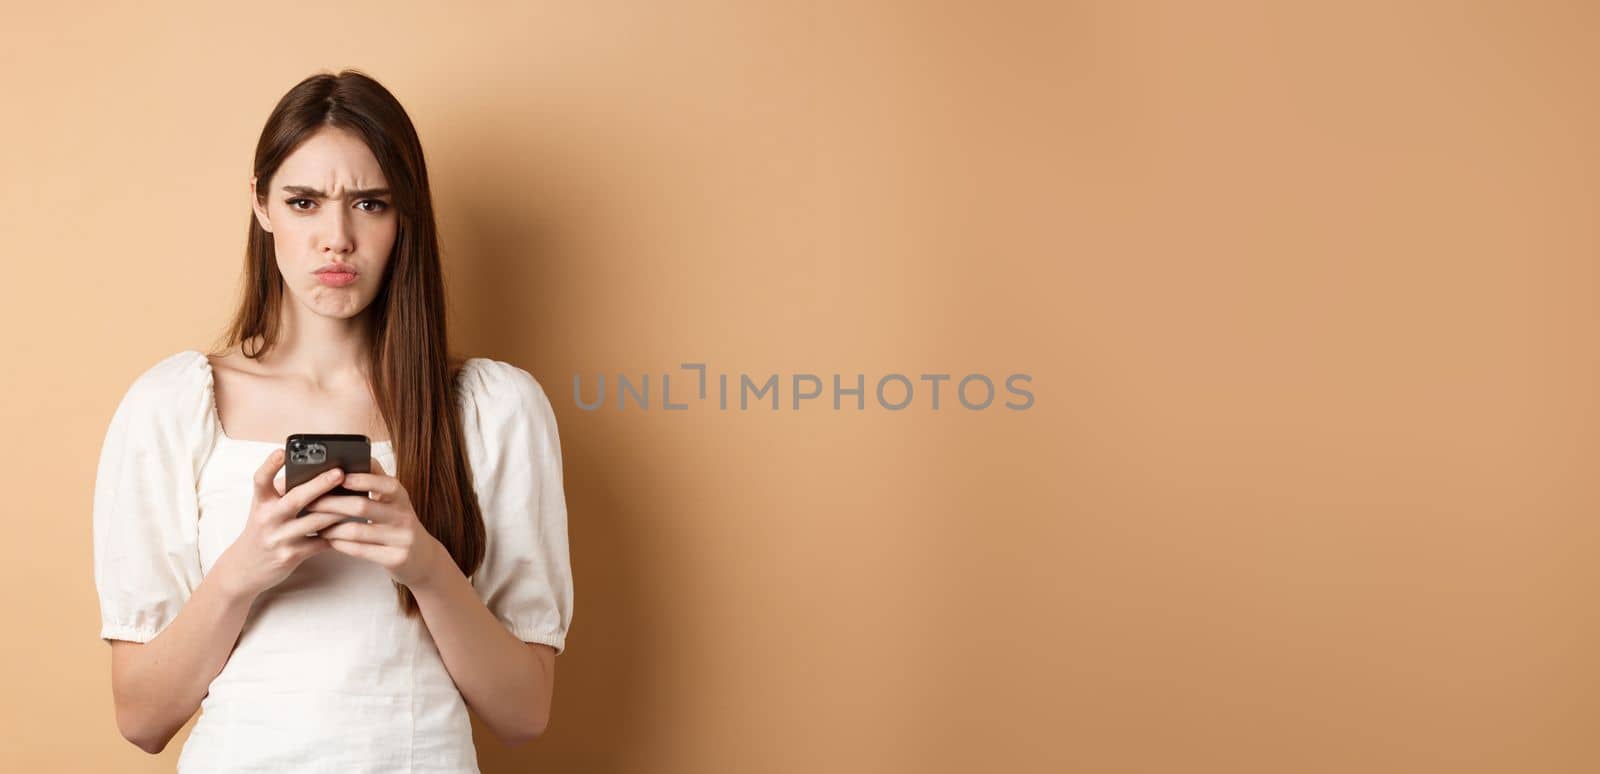 Disappointed girl with smartphone frowning, pucker lips upset, reading bad news on phone, standing on beige background.